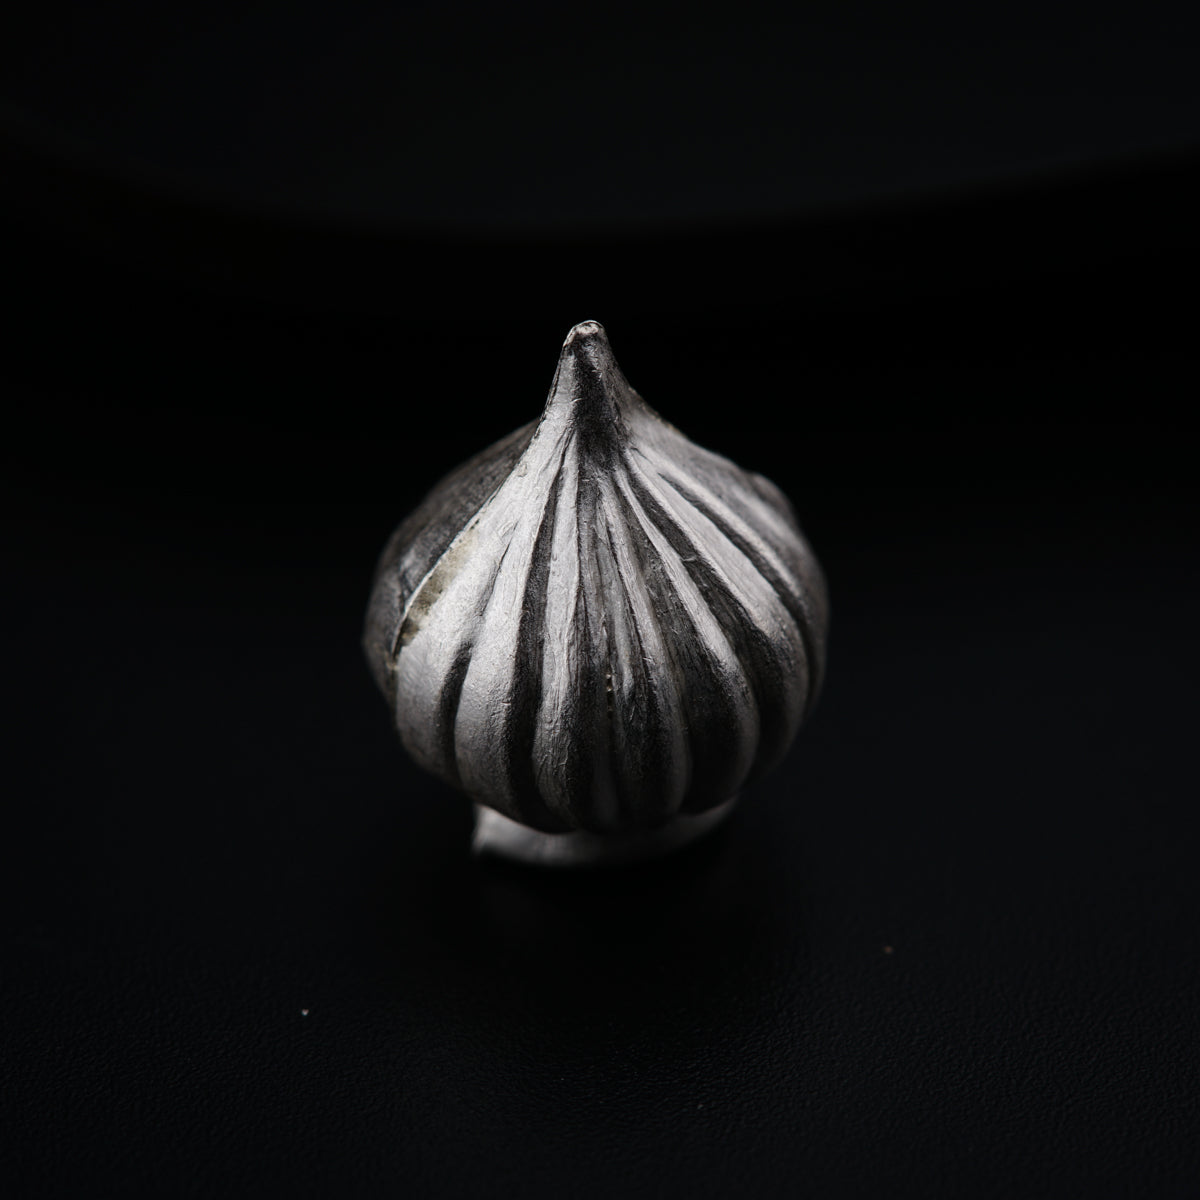 a black and white photo of a garlic